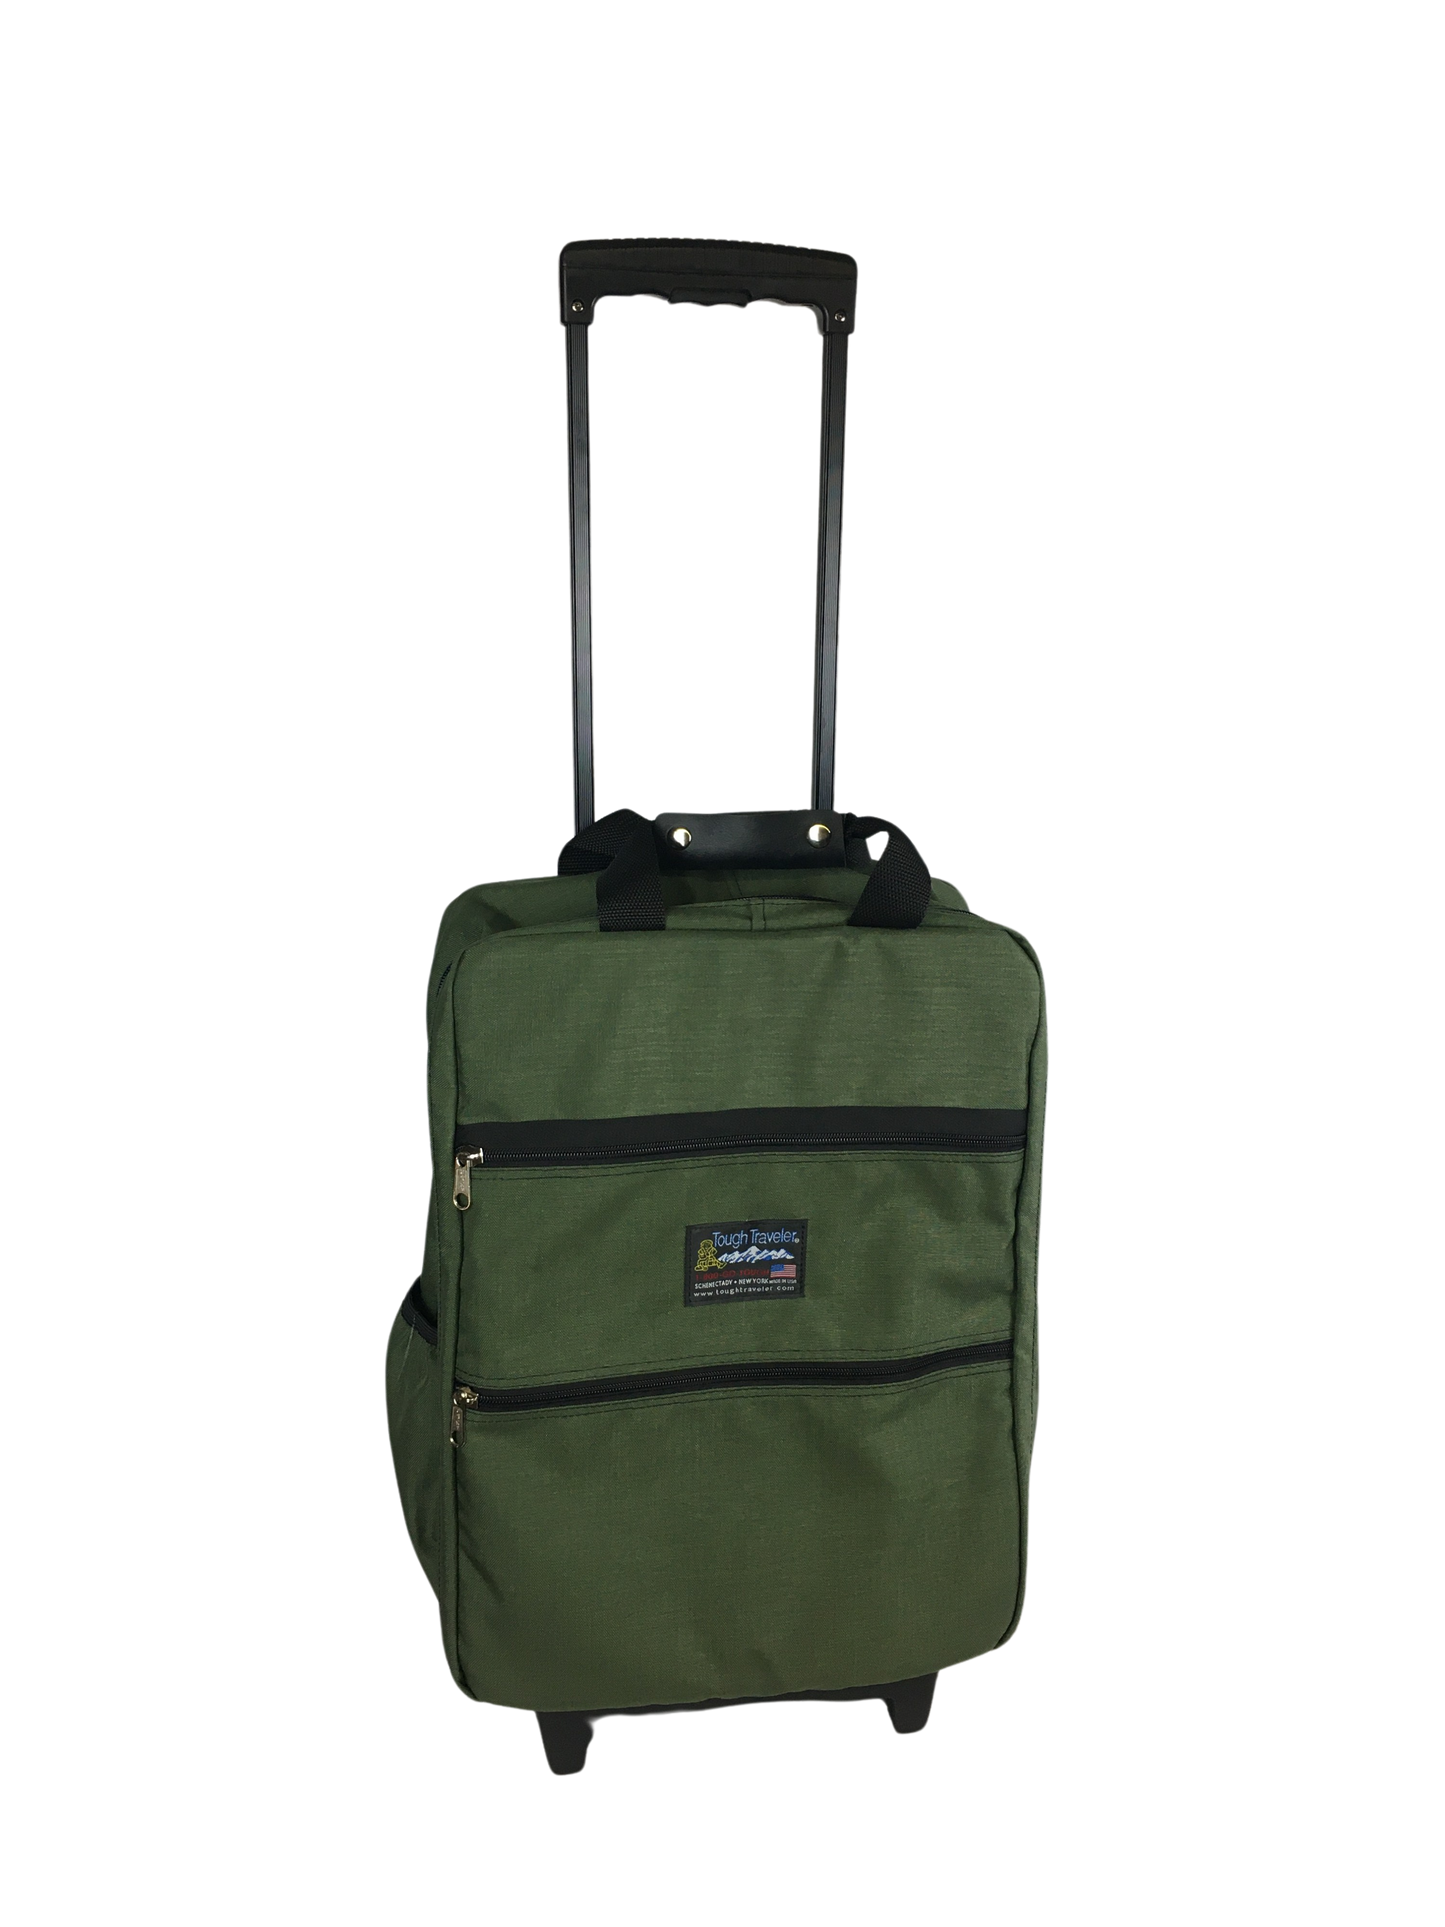 CLIPPER Wheeled Carry-On